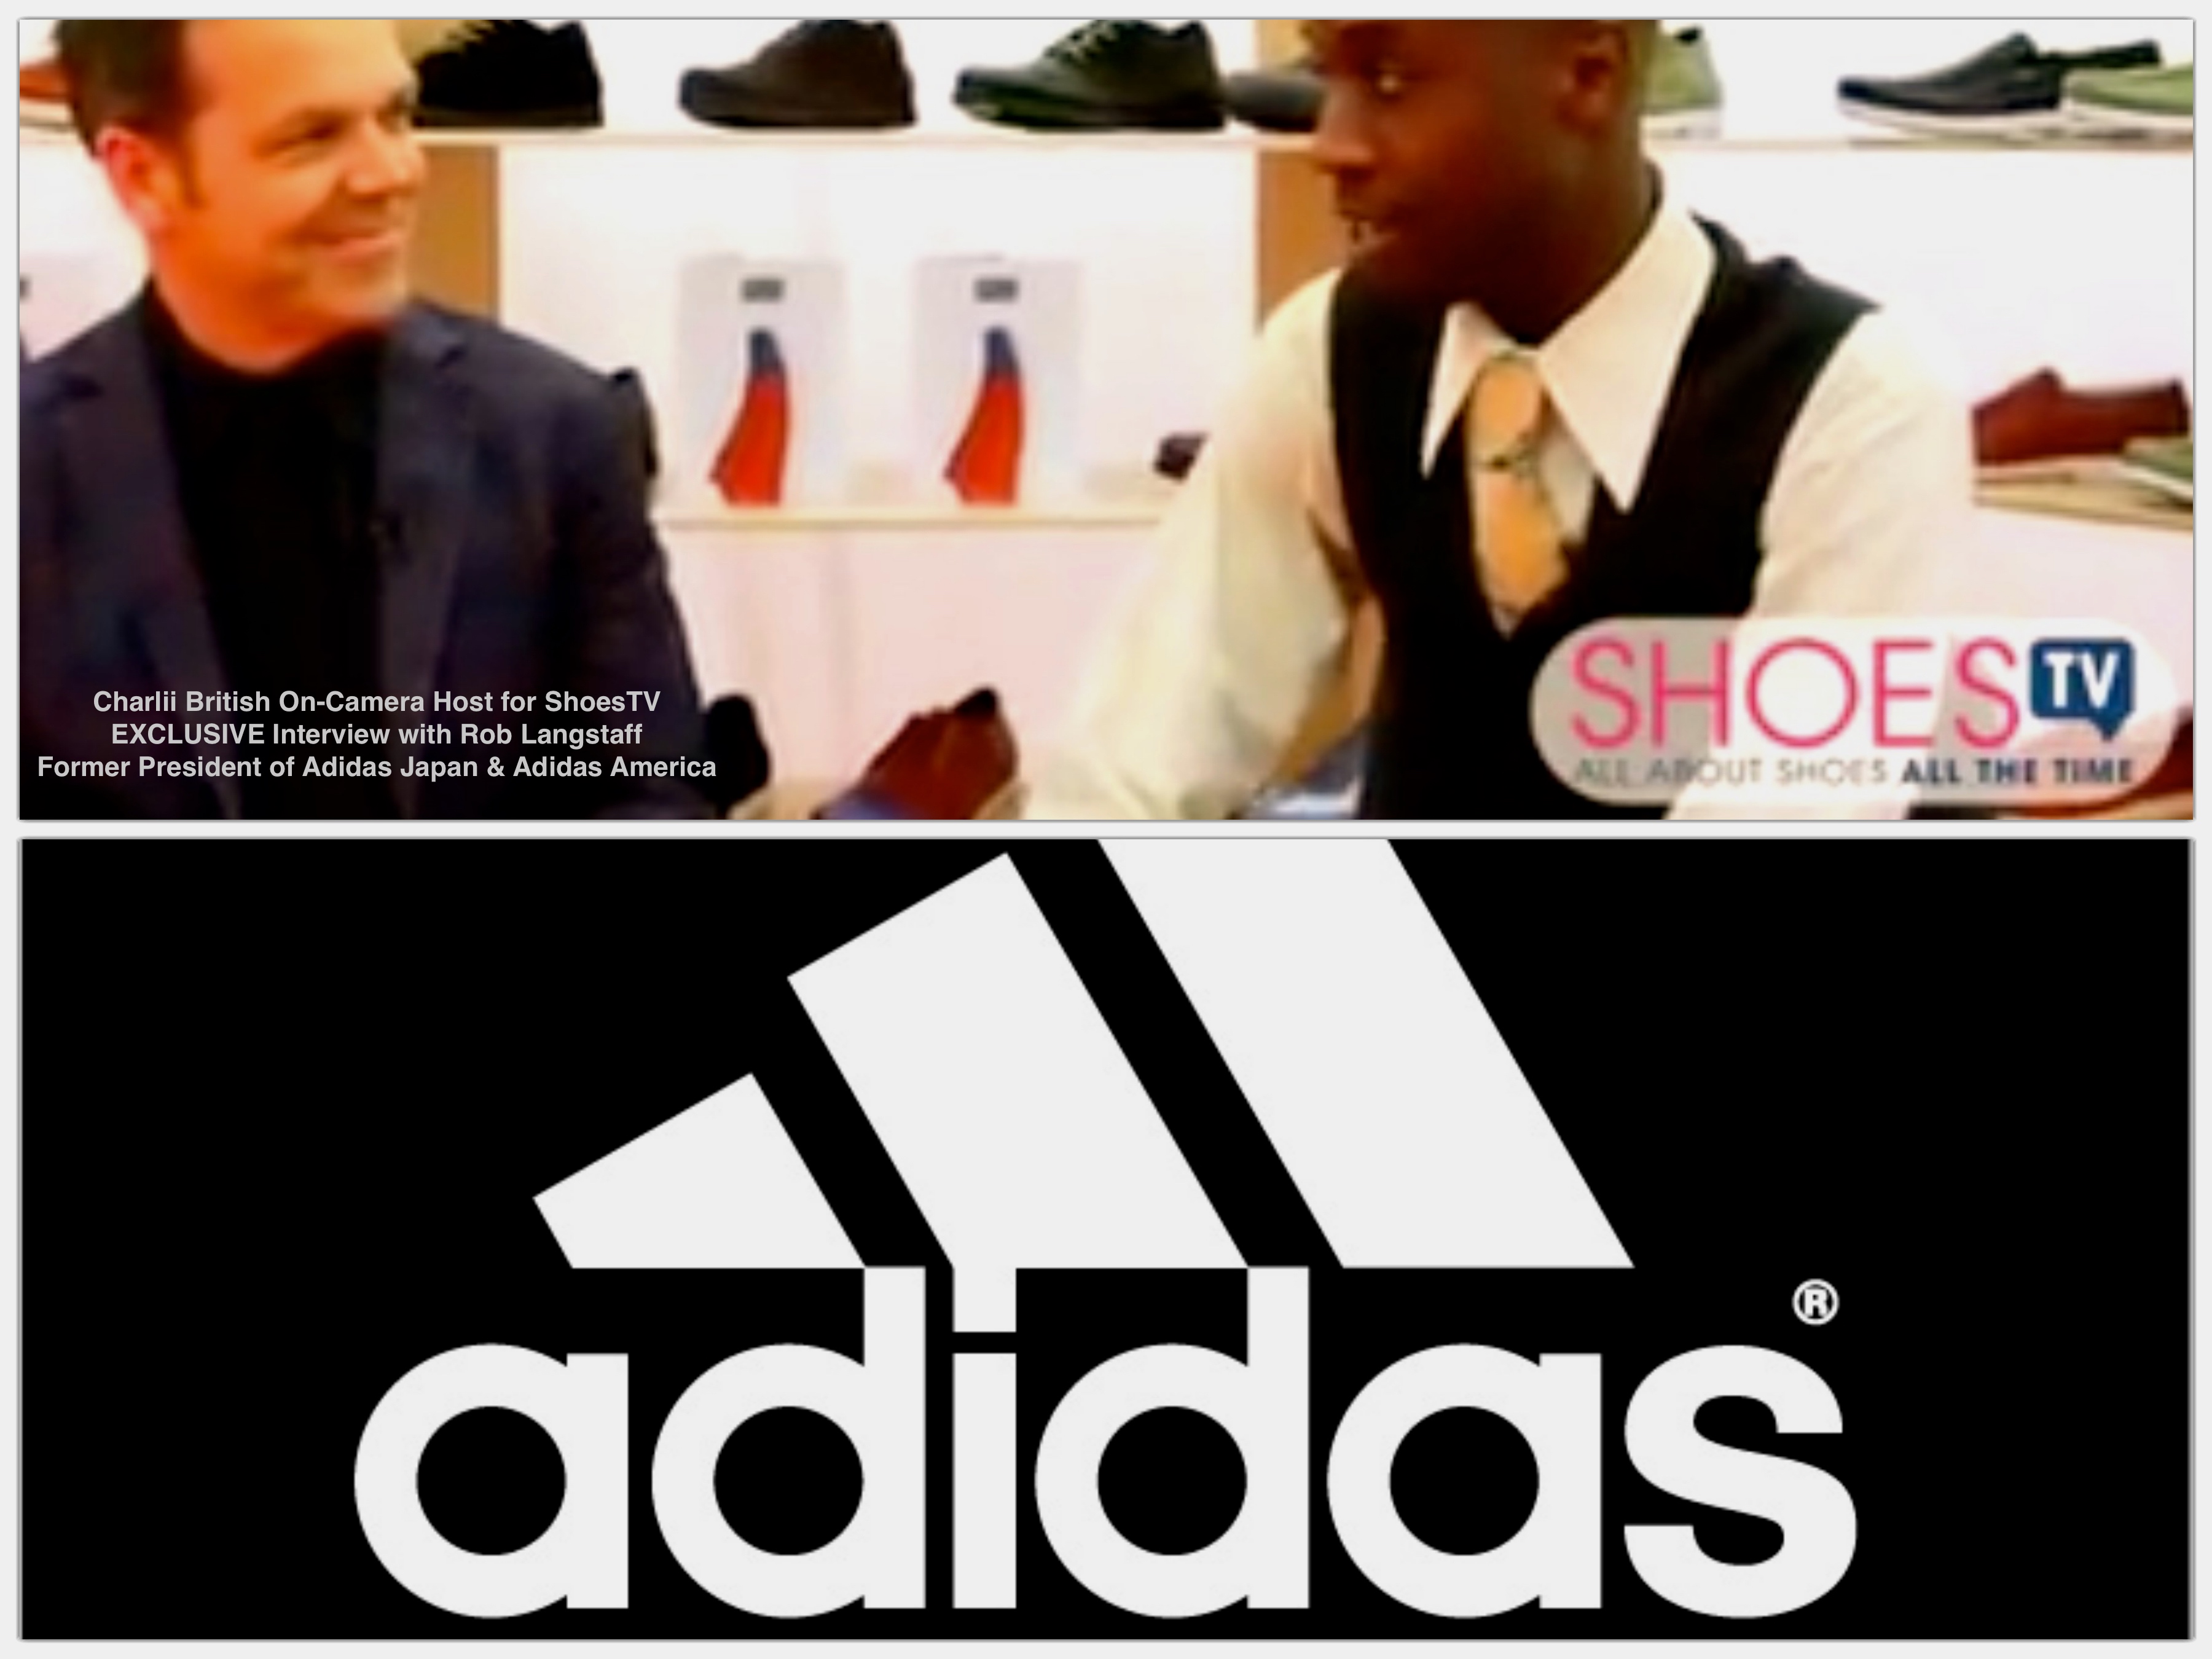 Charlii British On-Camera Host for ShoesTV EXCLUSIVE Interview With Rob Langstaff , Former President of Adidas Japan & Adidas America ... https://www.youtube.com/watch?v=2SB5lsjvNRk&list=PLDA9E3F7F31636E49&index=18